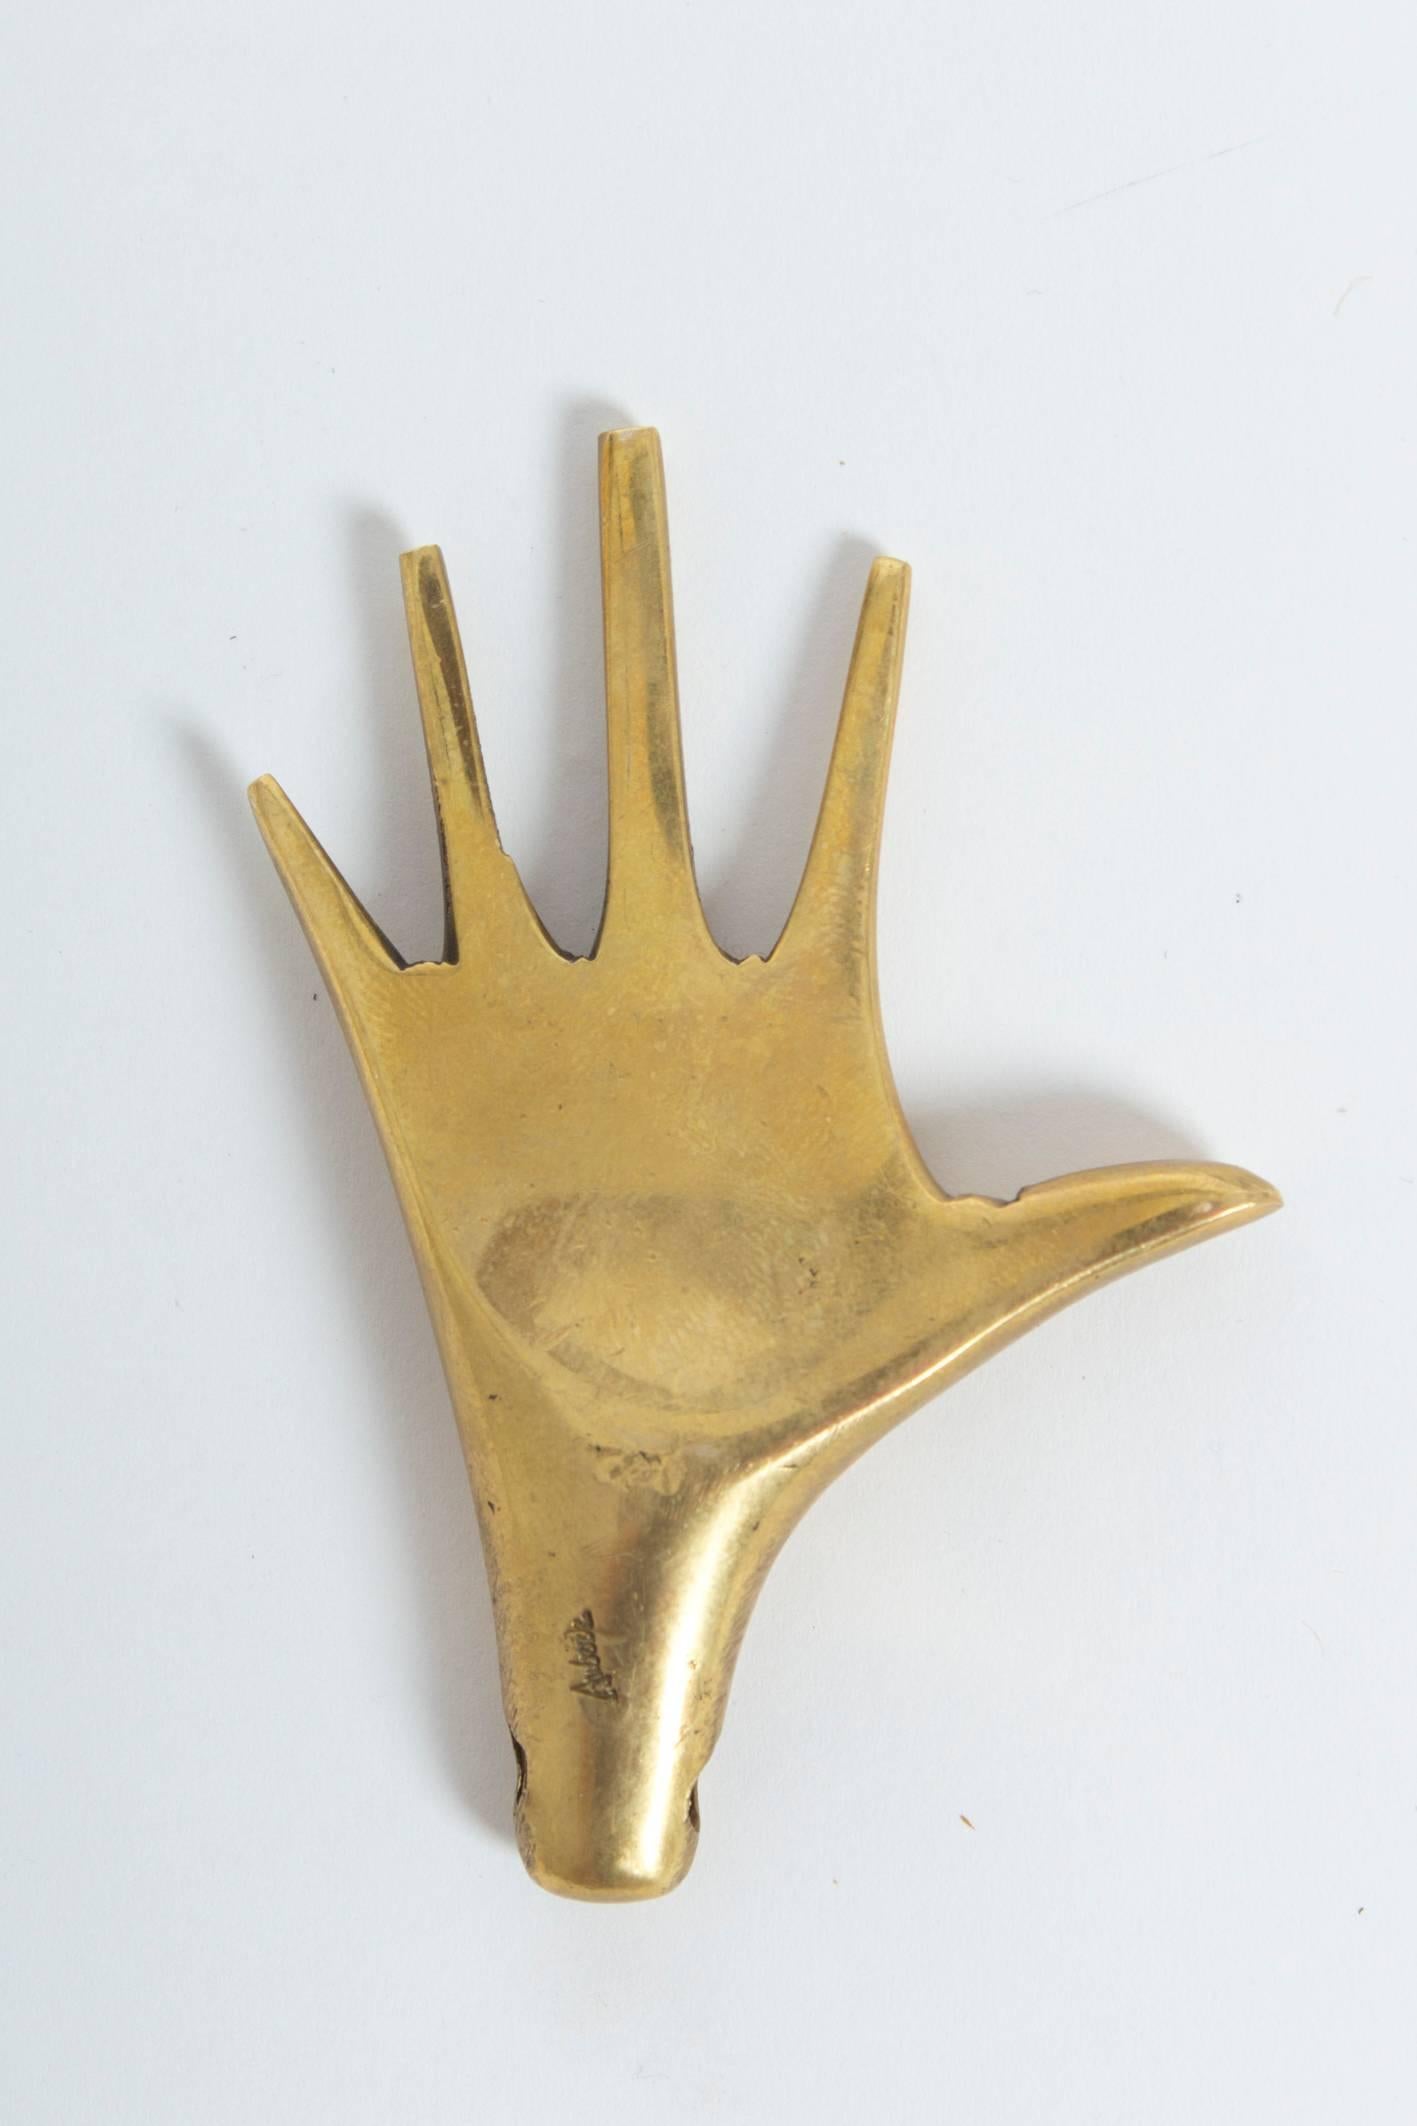 This iconic piece of brass stands for most of the humoristic pieces the Auböck workshop produced over four generations, indeed a rare find! It was once attached to a leather strap which was unfortunately not preserved.